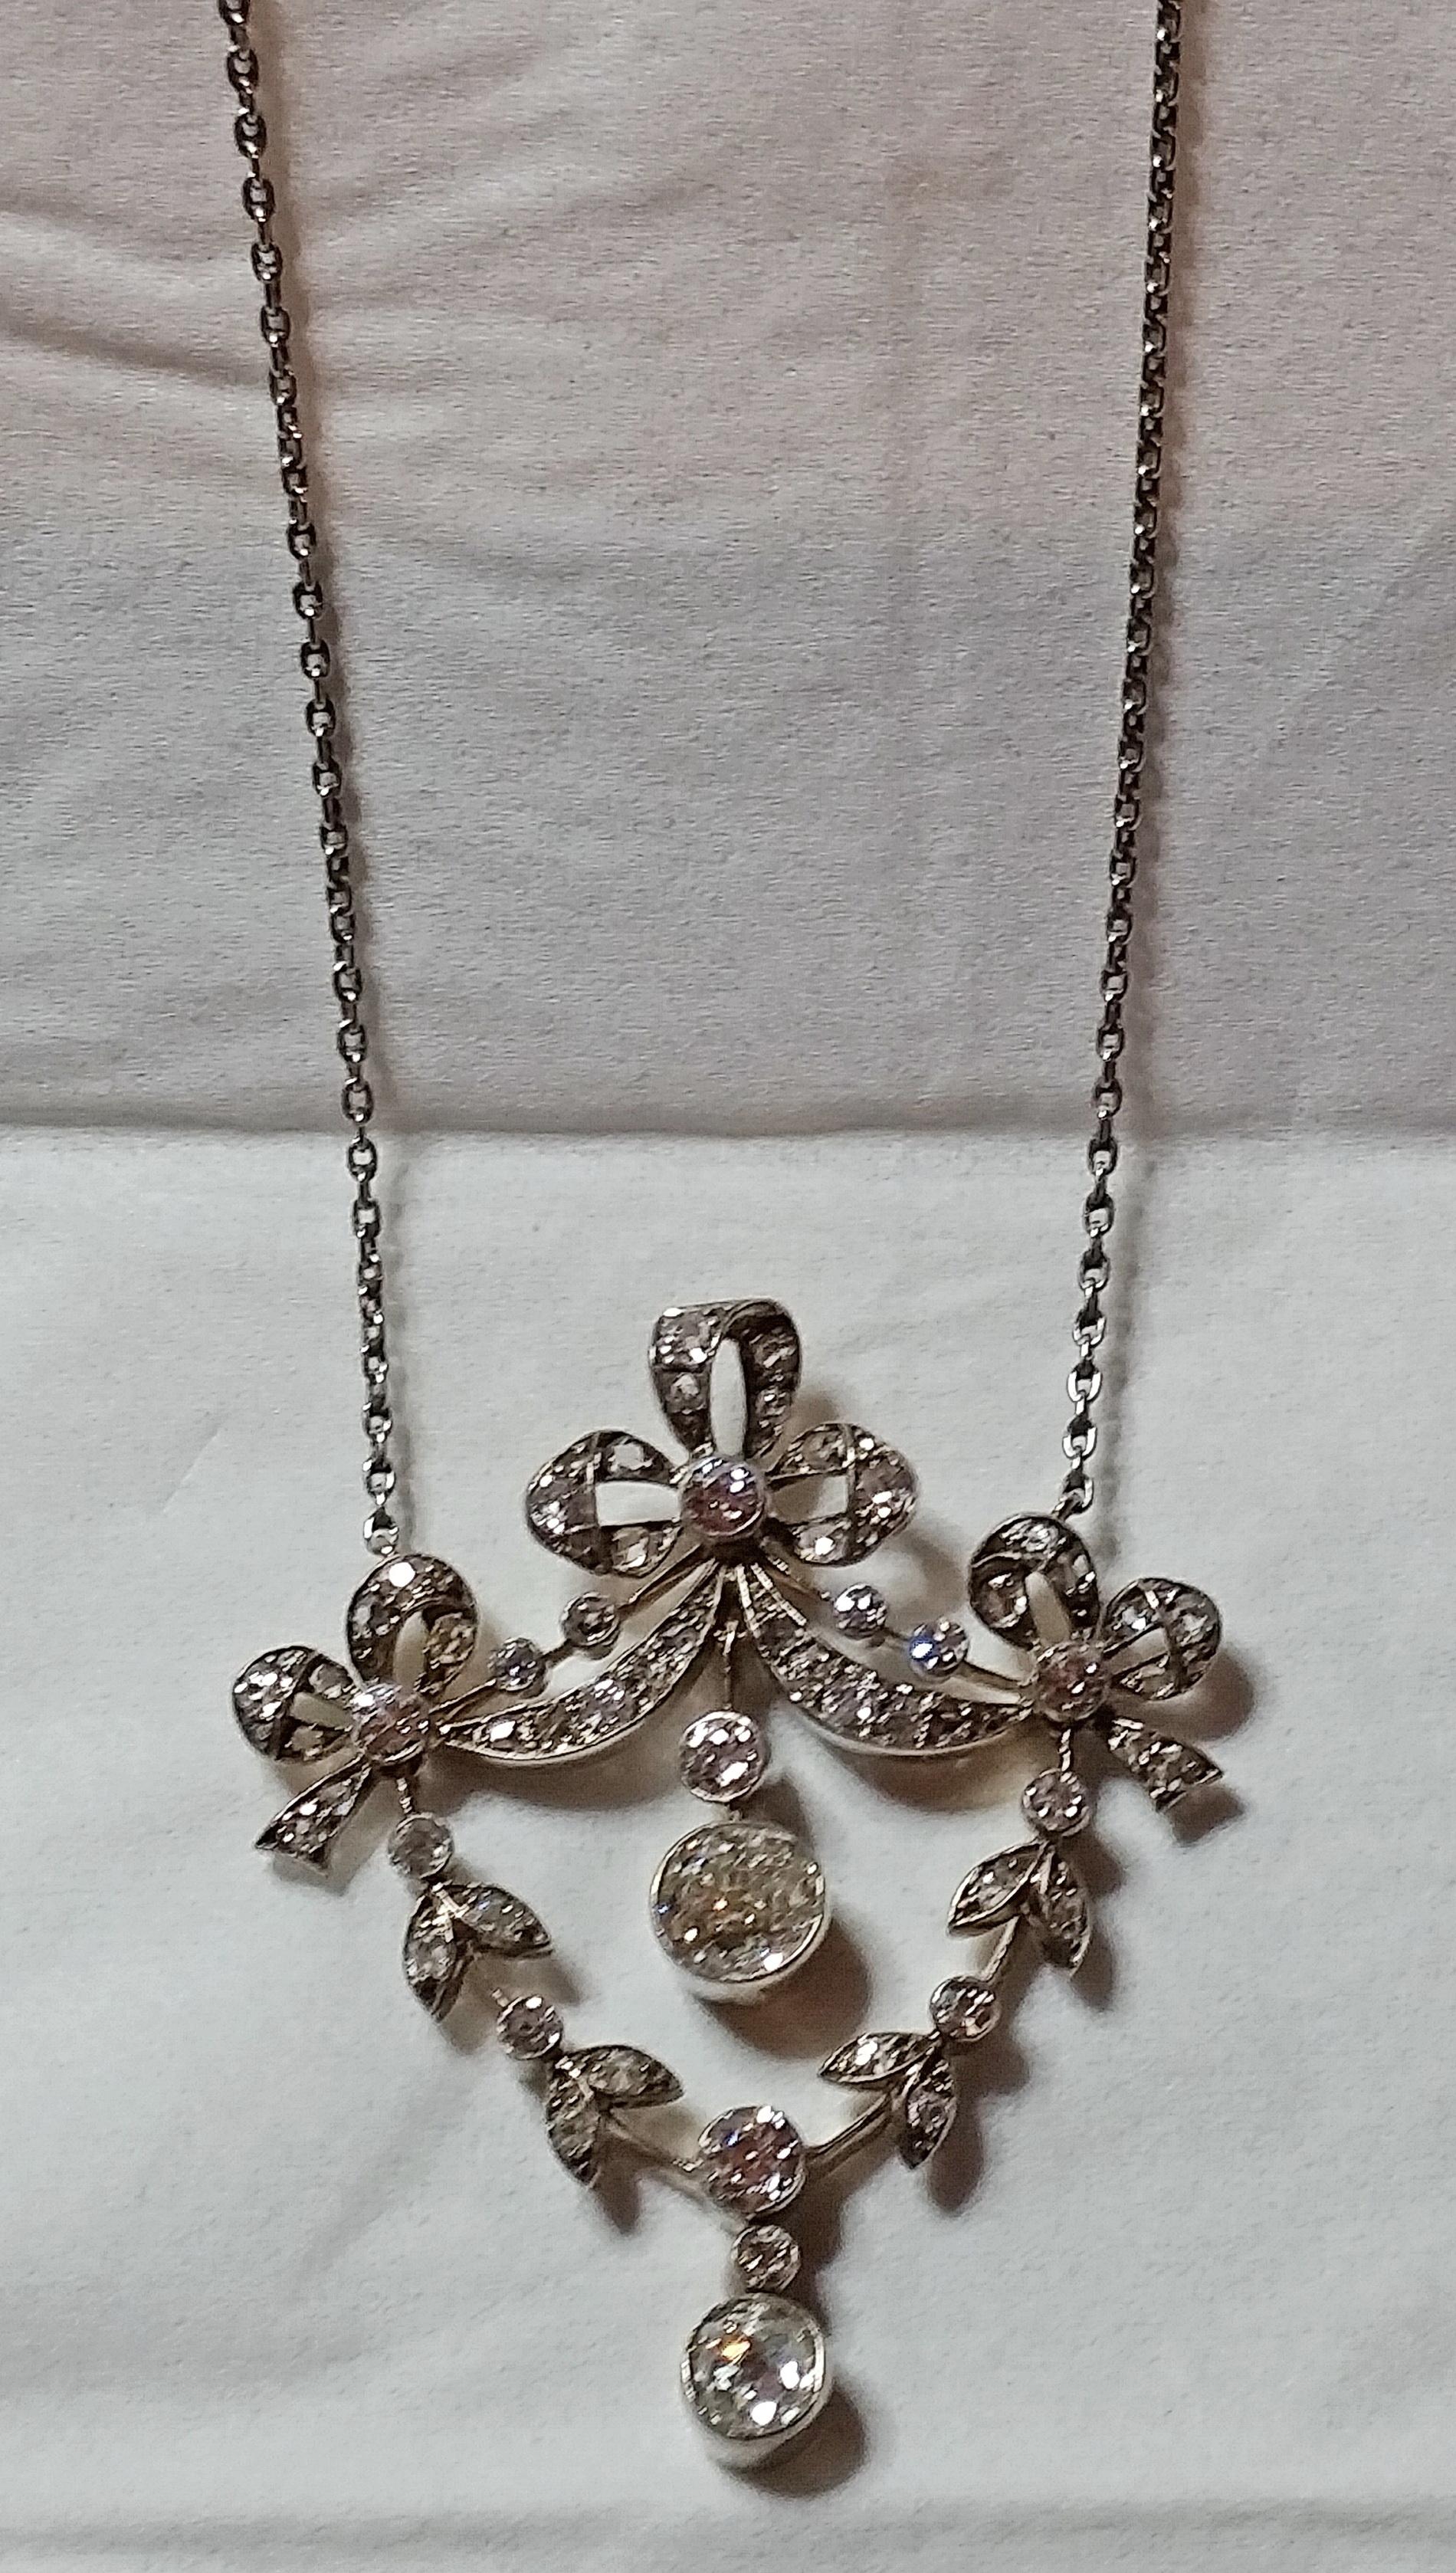 Golden Art Nouveau necklace of most elegant appearance,  looking like stylized flower's blossoms attached to leafy stems - these ones hung up at bows / meshes visible at top area.

Covered with various diamonds (vintage cuts), having 3.0 carat in